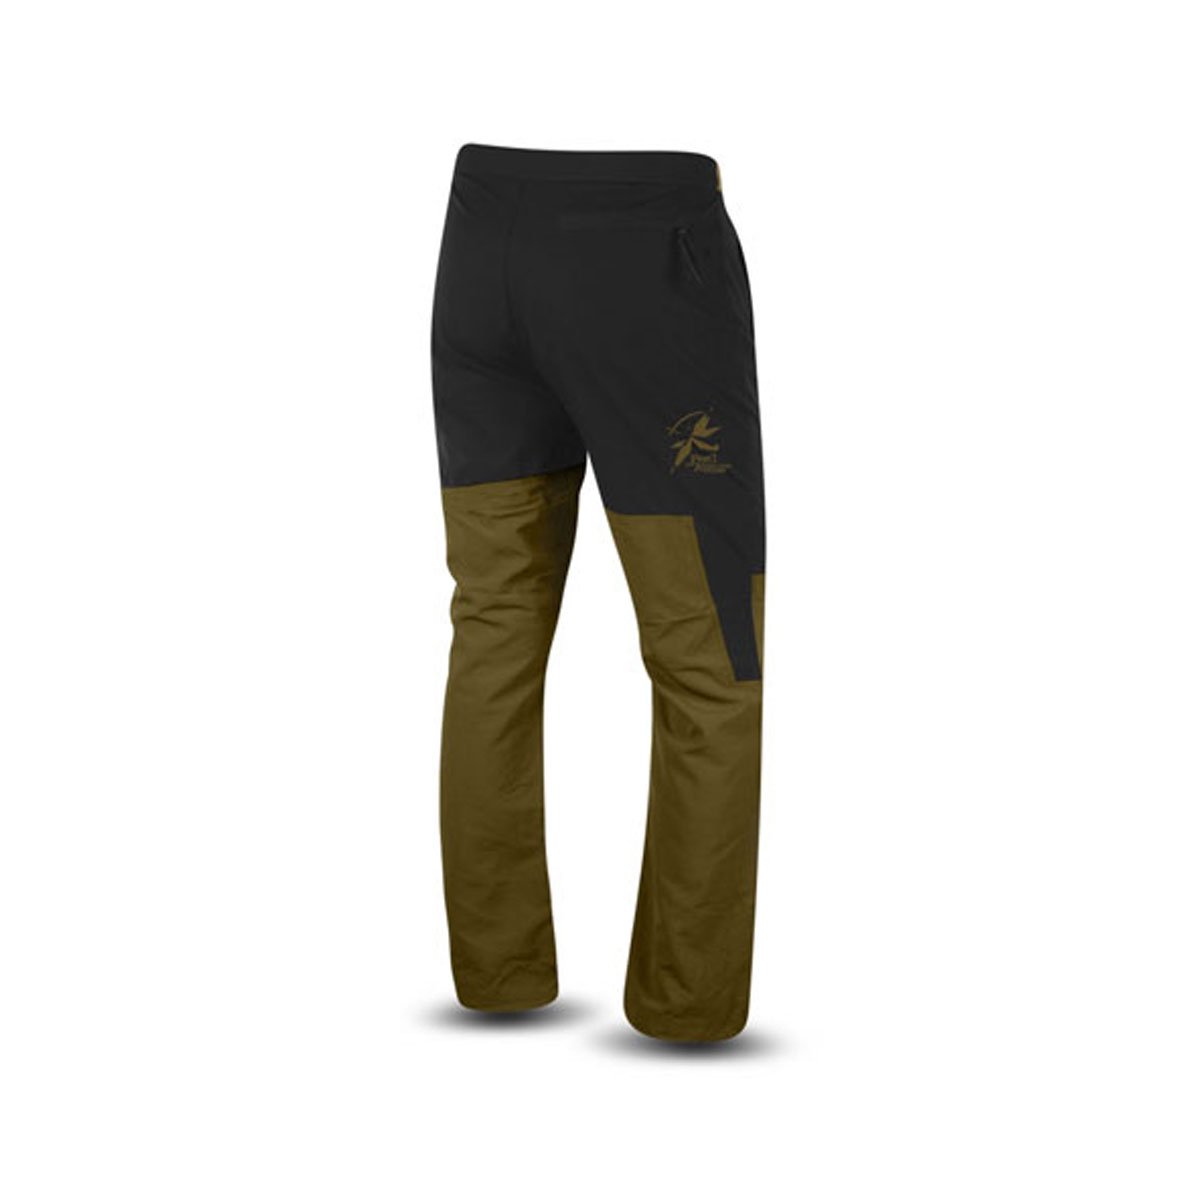 Direct Outdoor Pants - Adventure Trousers - Hiking and Travel Pants - Khaki 2